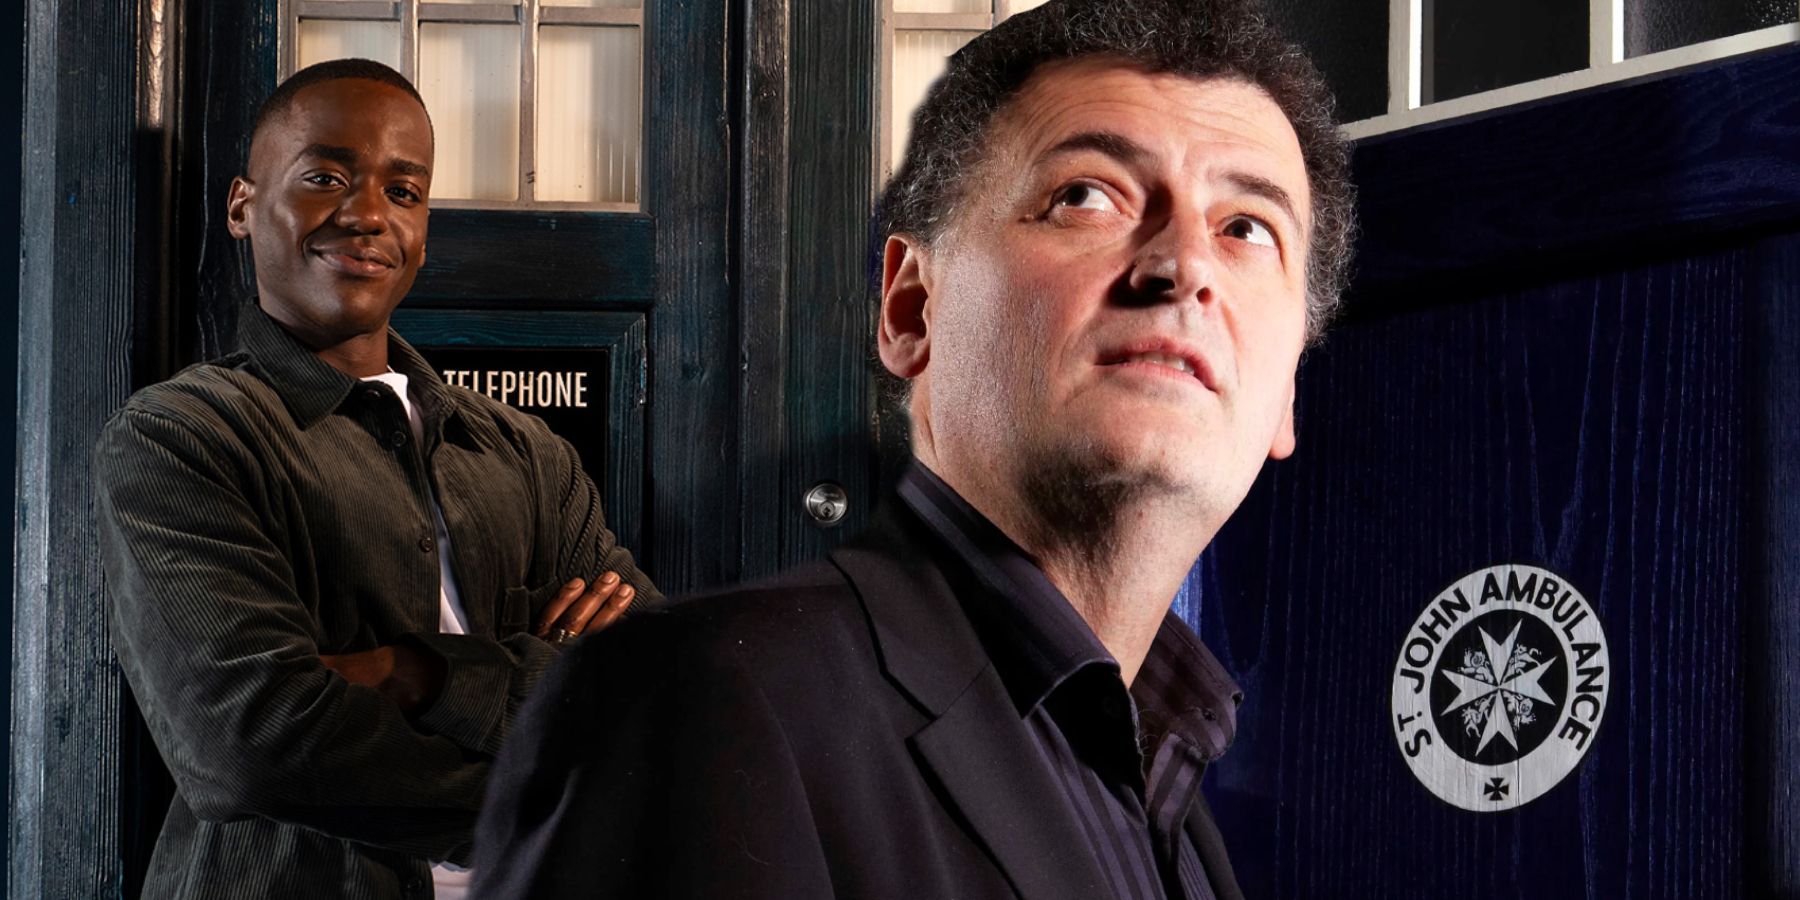 Ncuti Gatwa as the Doctor and Steven Moffat in front of the TARDIS